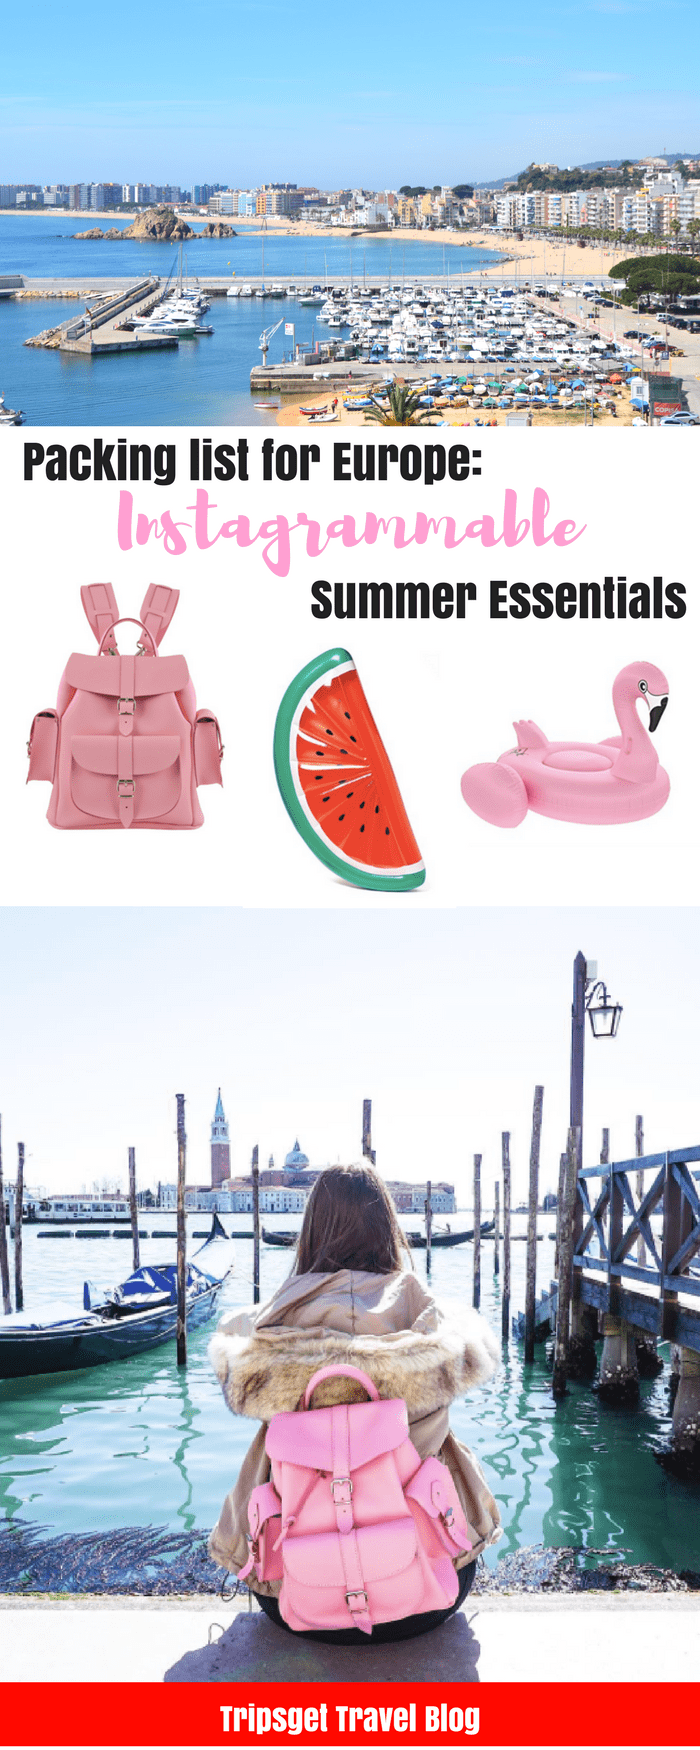 Packing list for Summer in Europe: most instagrammable summer essentials and accessories: from inflatable flamingo to pink leather backpack